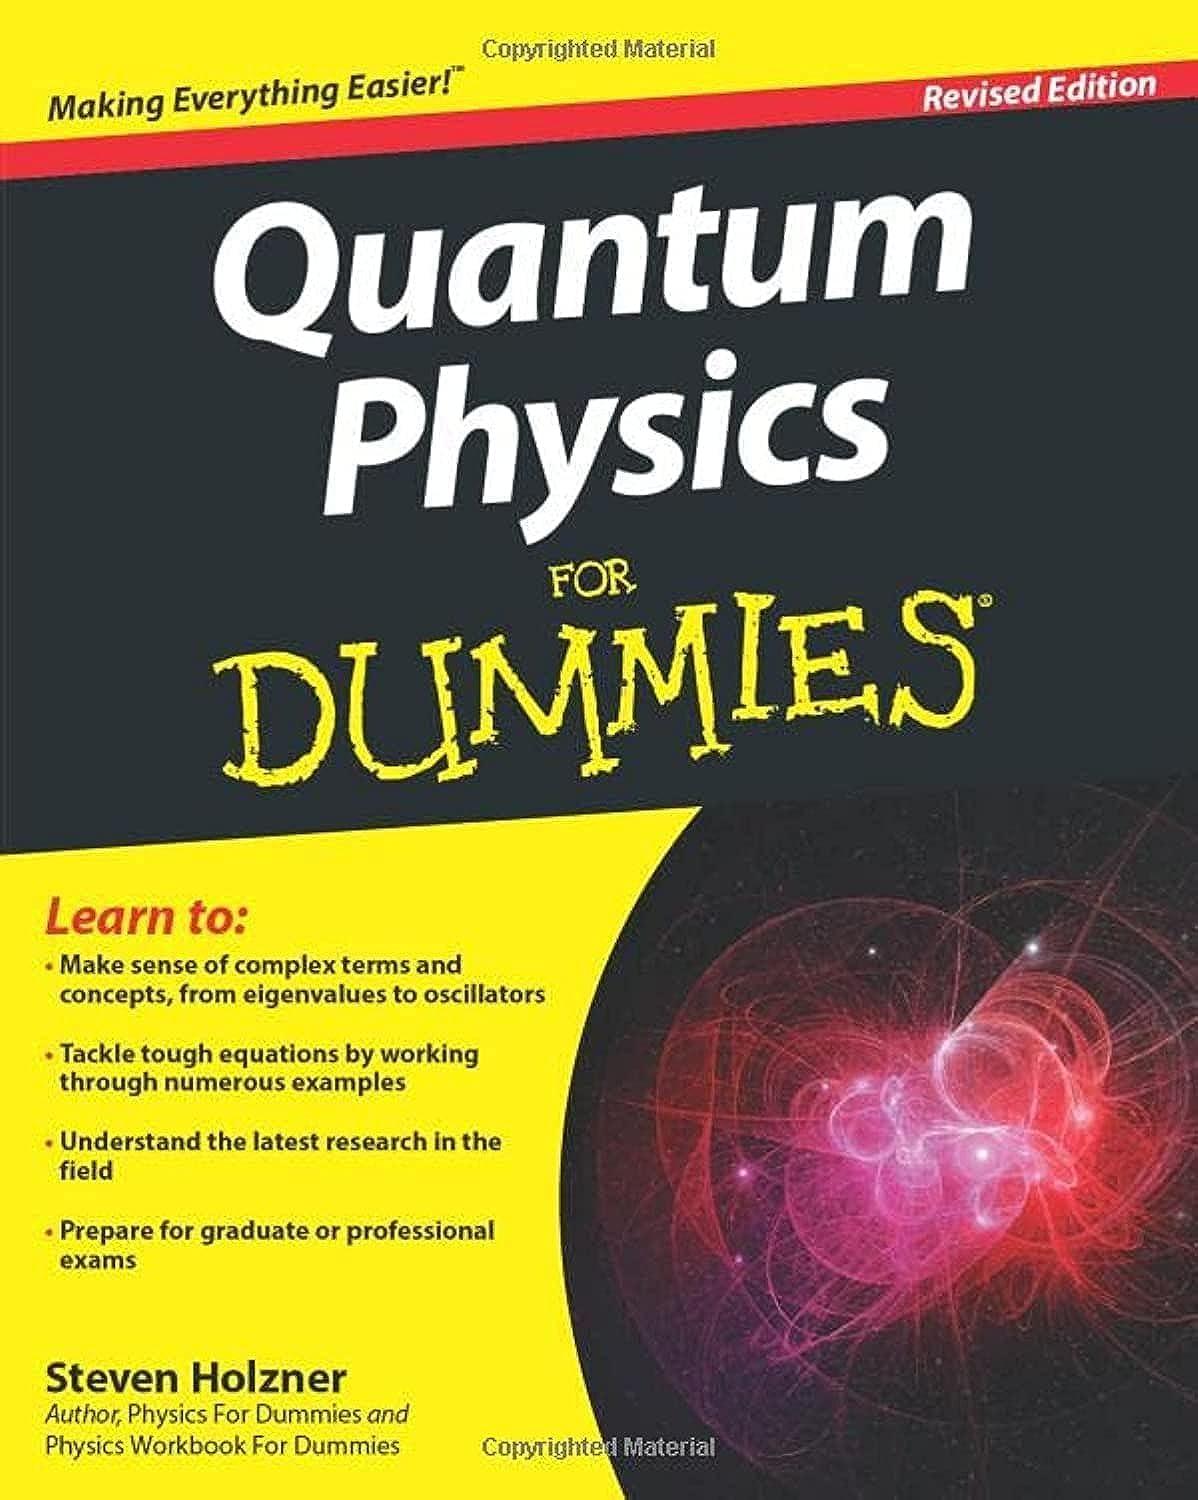 quantum physics for dummies 1st edition revised edition steven holzner 1118460820, 978-1118460825